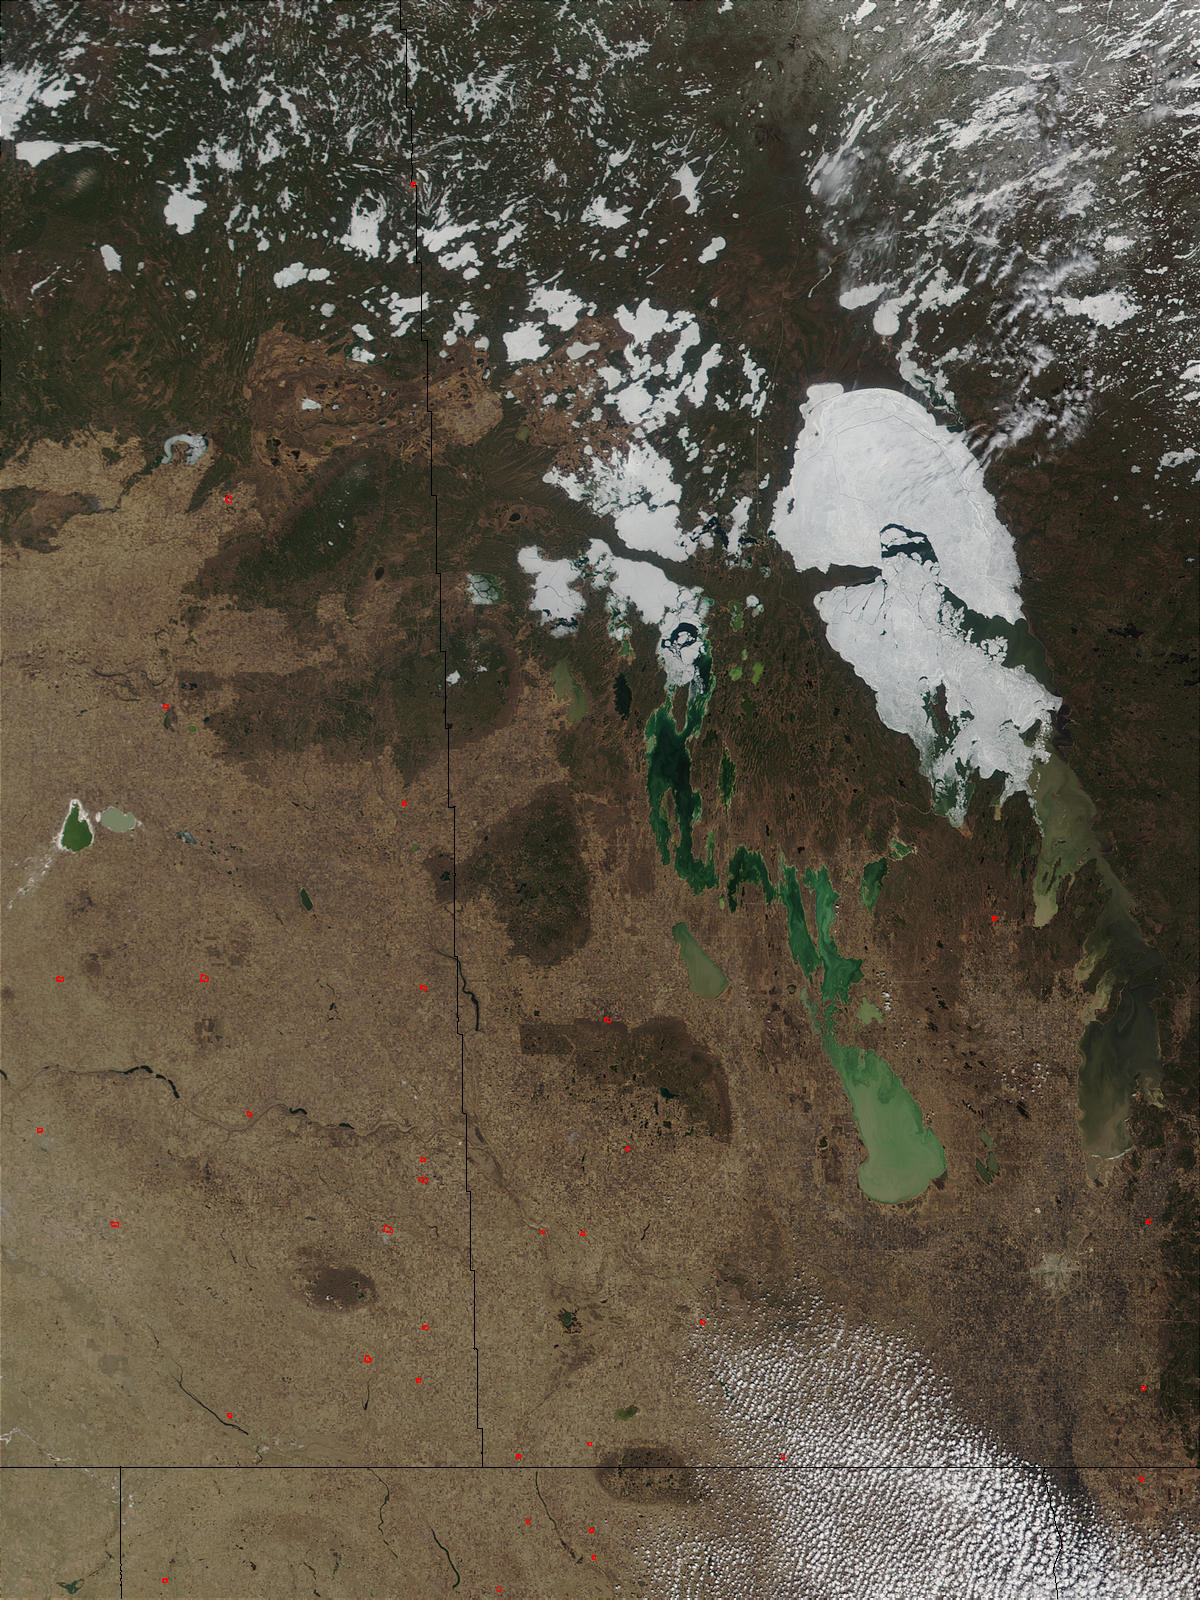 Fires in Saskatchewan and Manitoba, Canada - related image preview